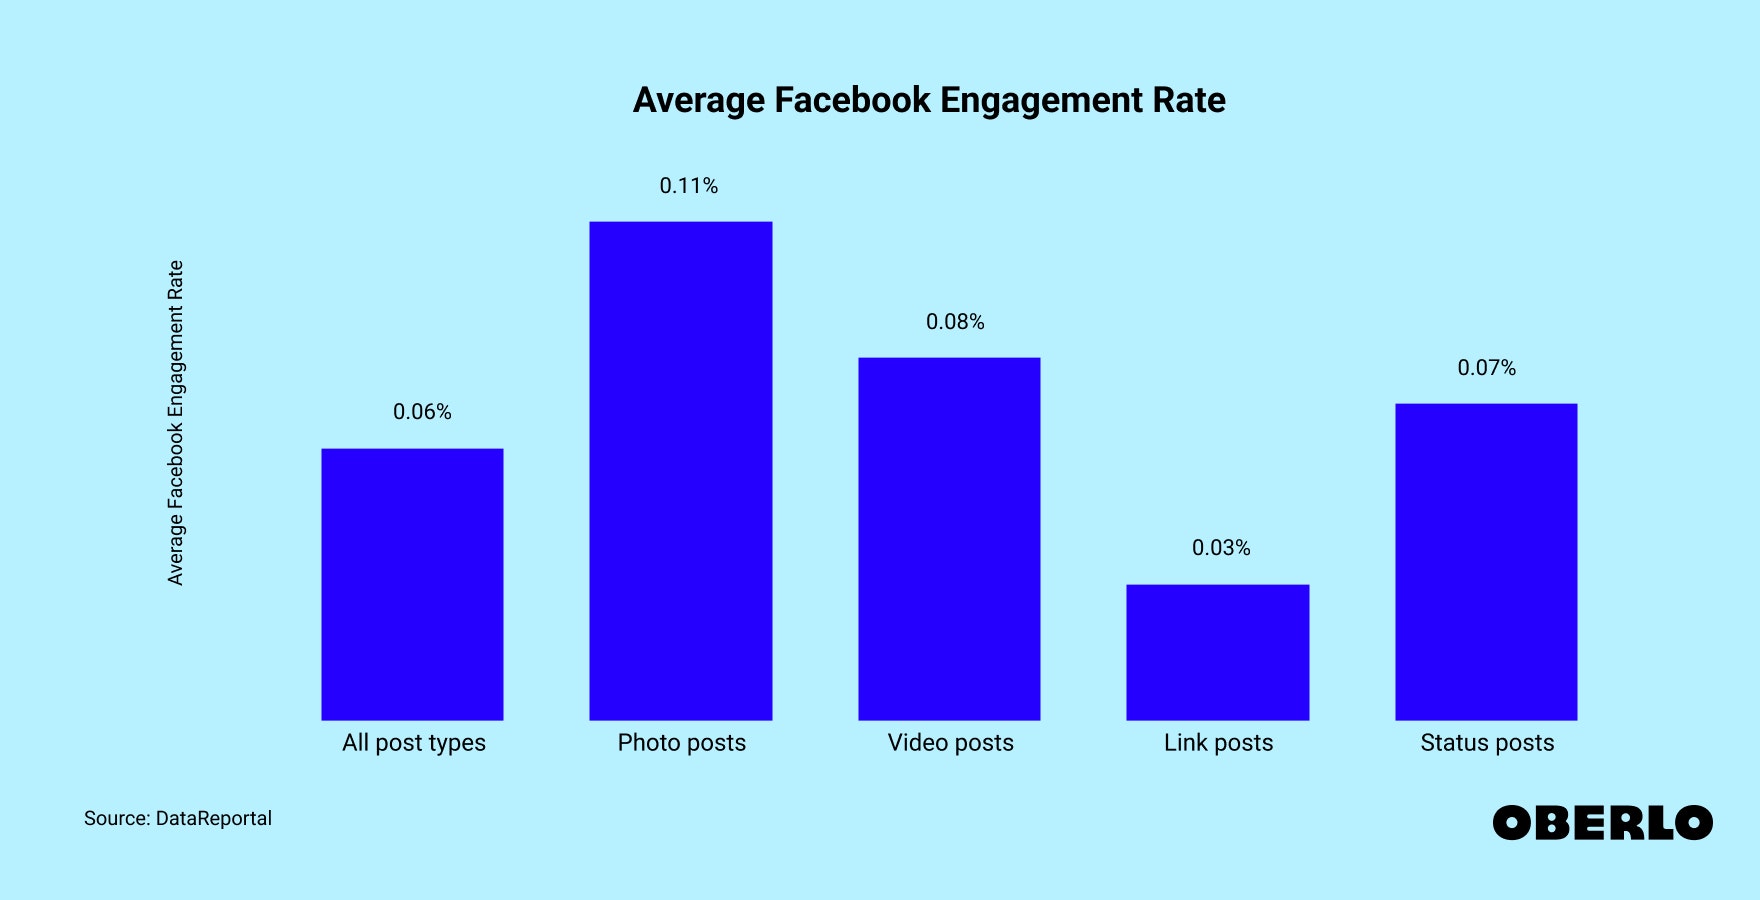 Chart showing the Average Facebook Engagement Rate